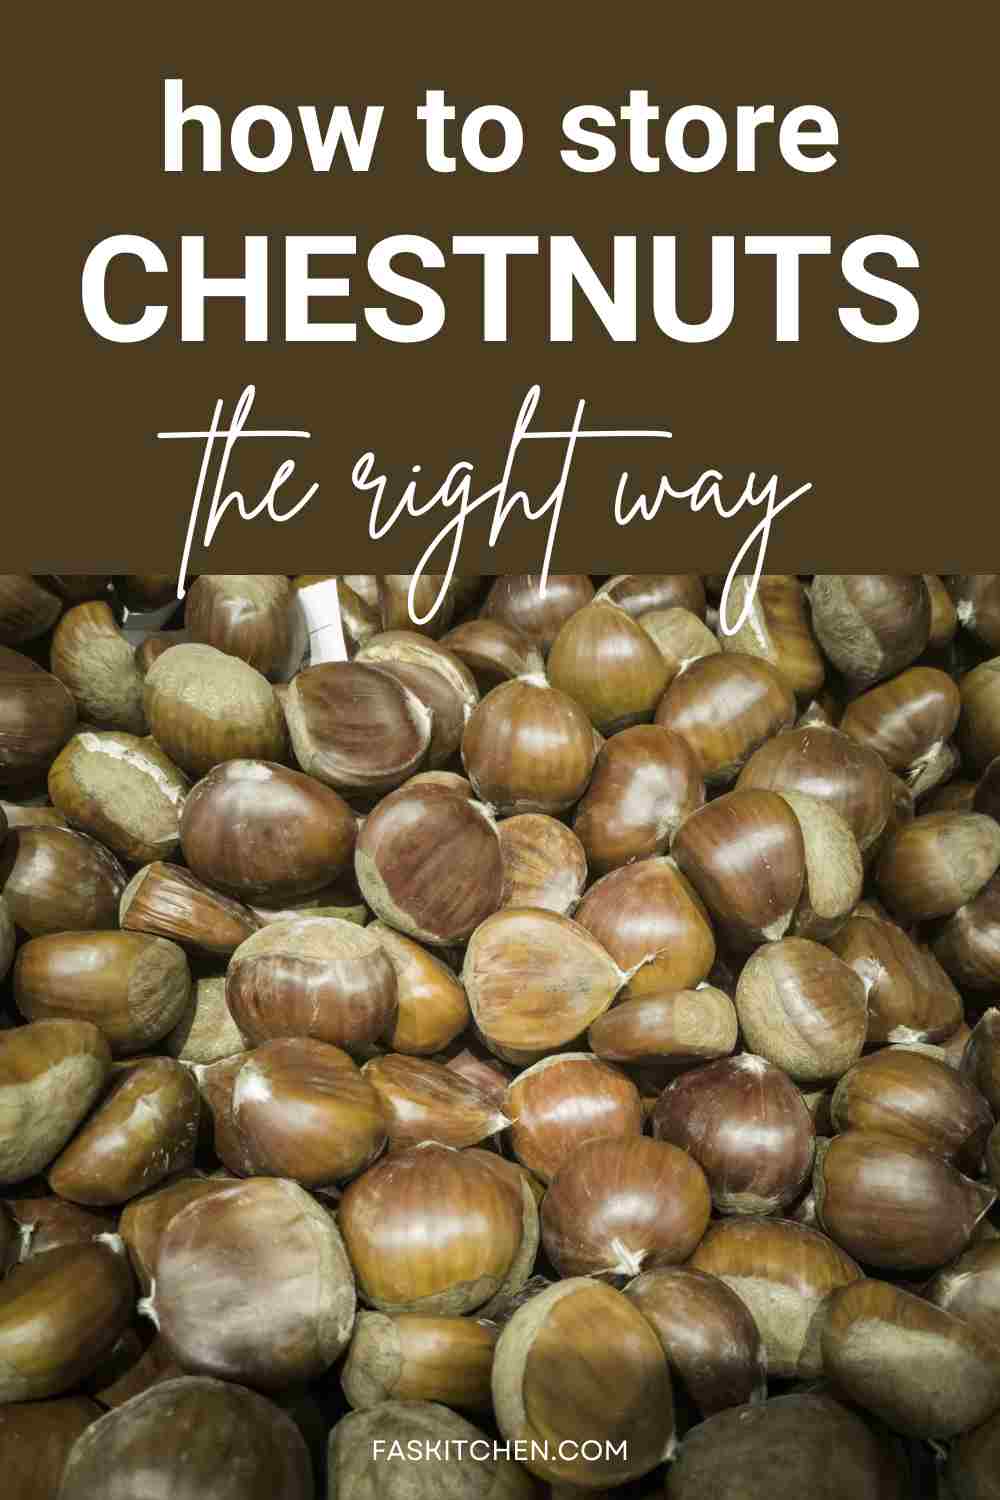 bunch of chestnuts. text reads: how to store chestnuts, the right way